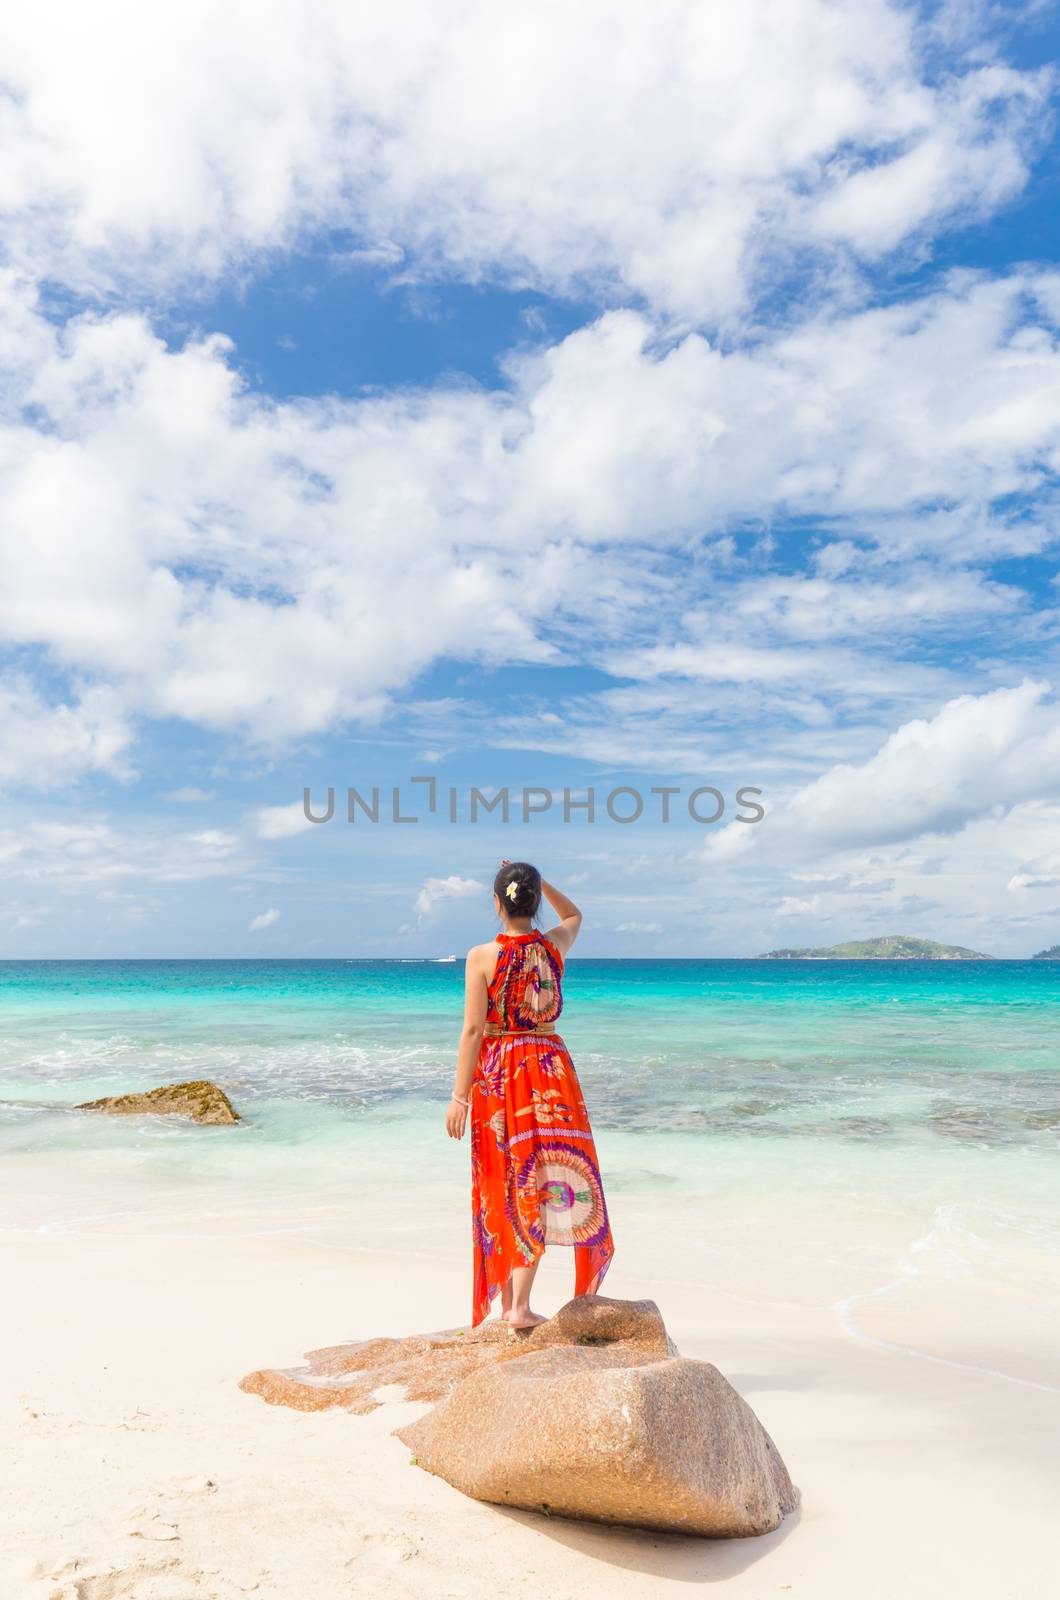 Woman relaxing at Anse Patates picture perfect beach on La Digue Island, Seychelles. by kasto